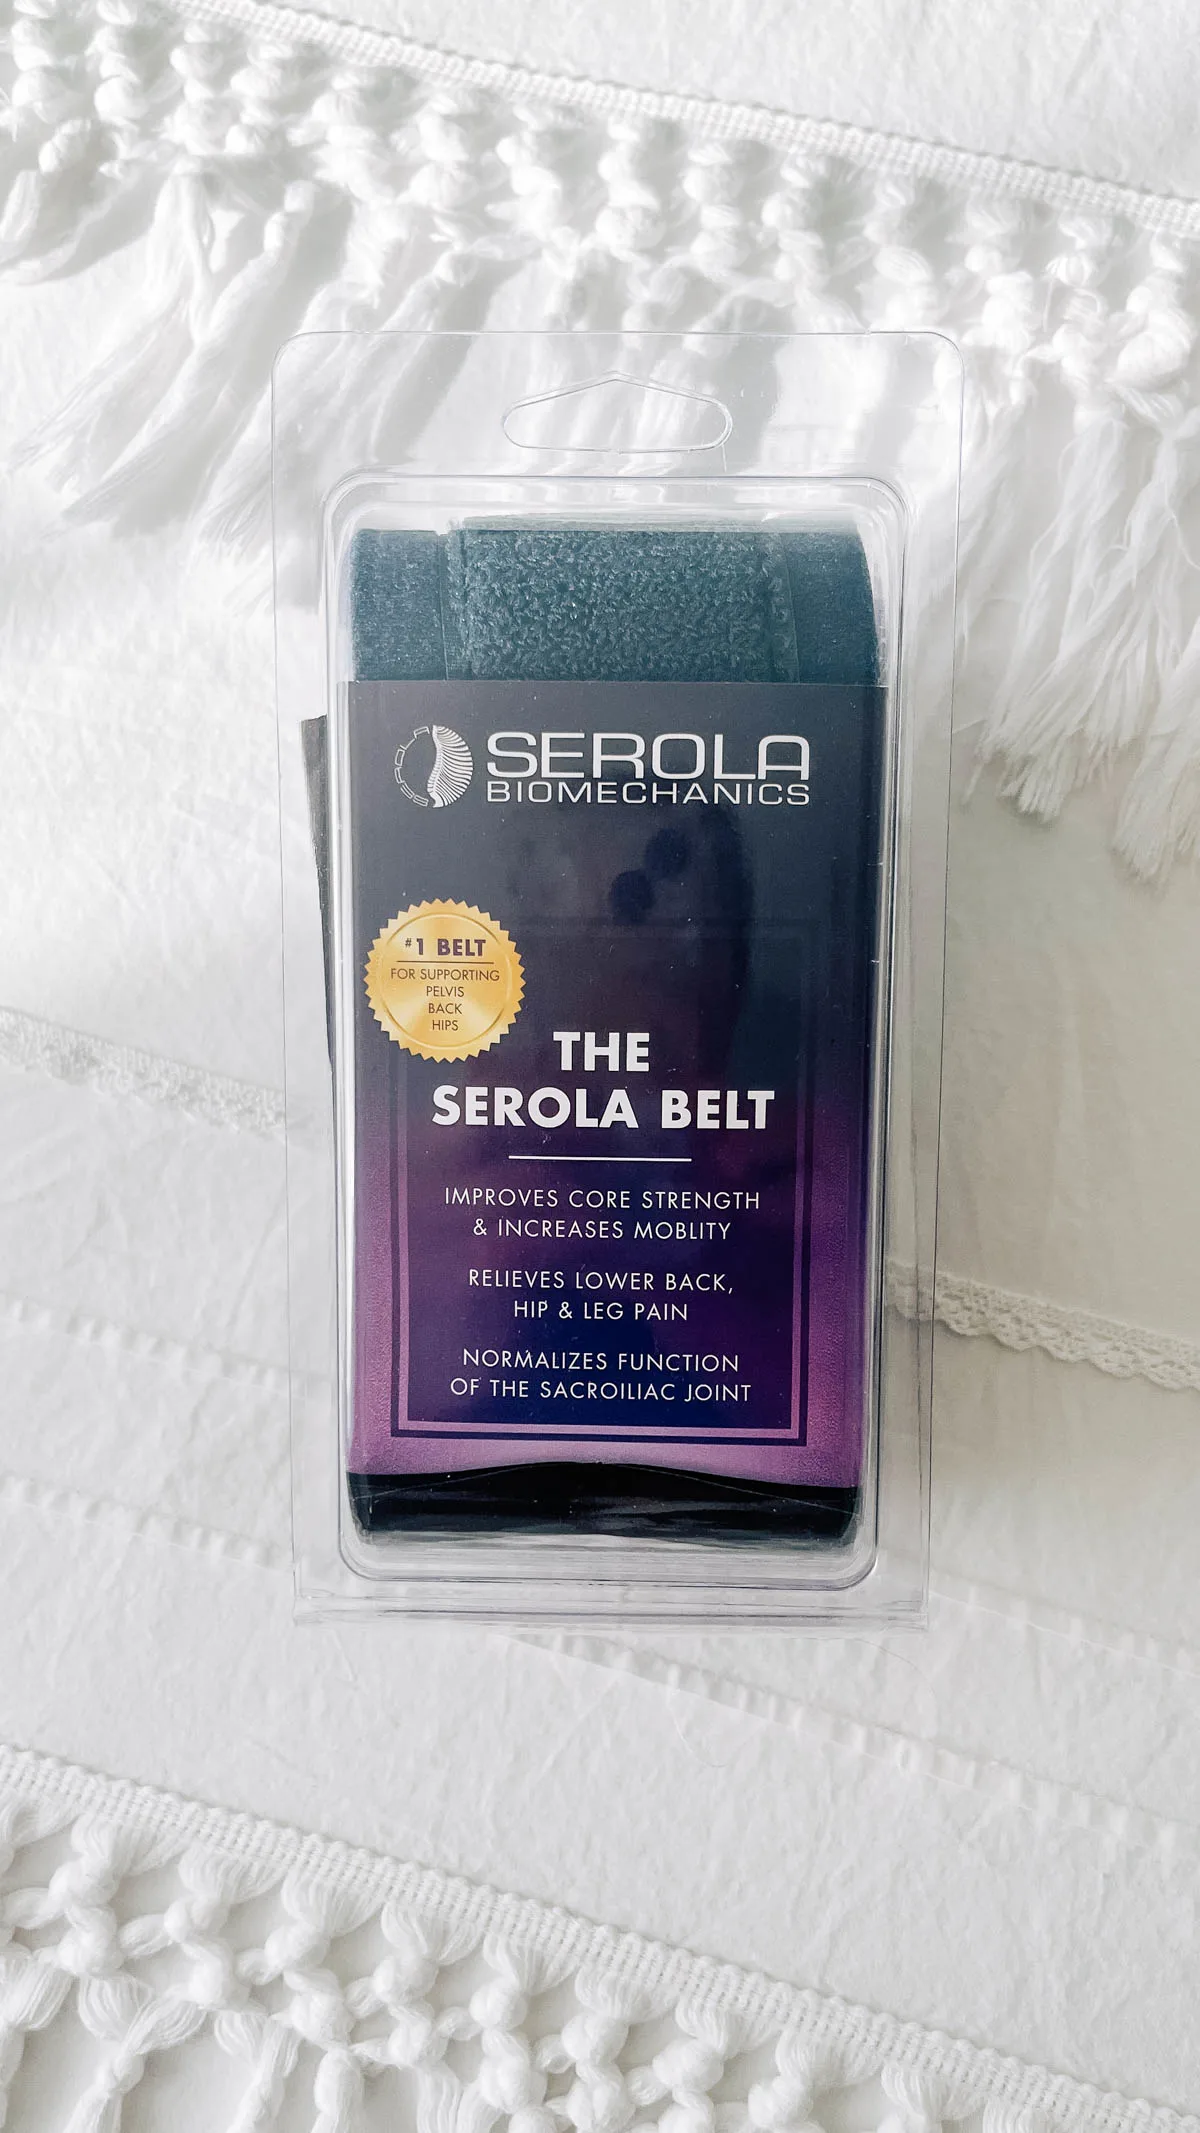 The Serola pelvic support belt in its packaging on a white bedspread.